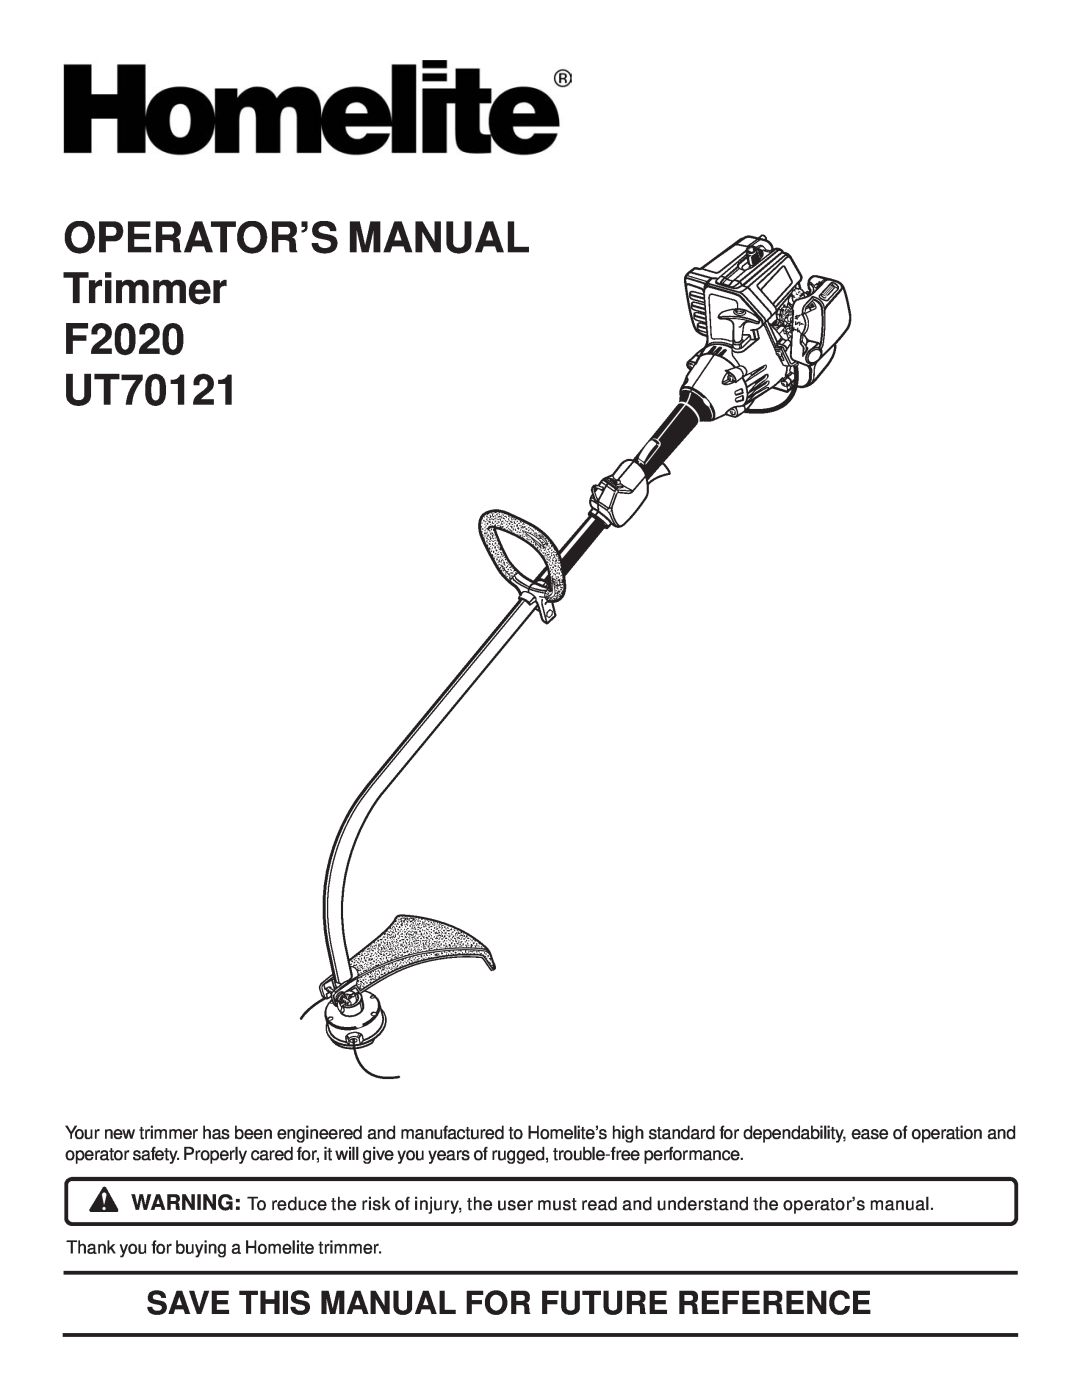 Homelite manual OPERATOR’S MANUAL Trimmer F2020 UT70121, Save This Manual For Future Reference 